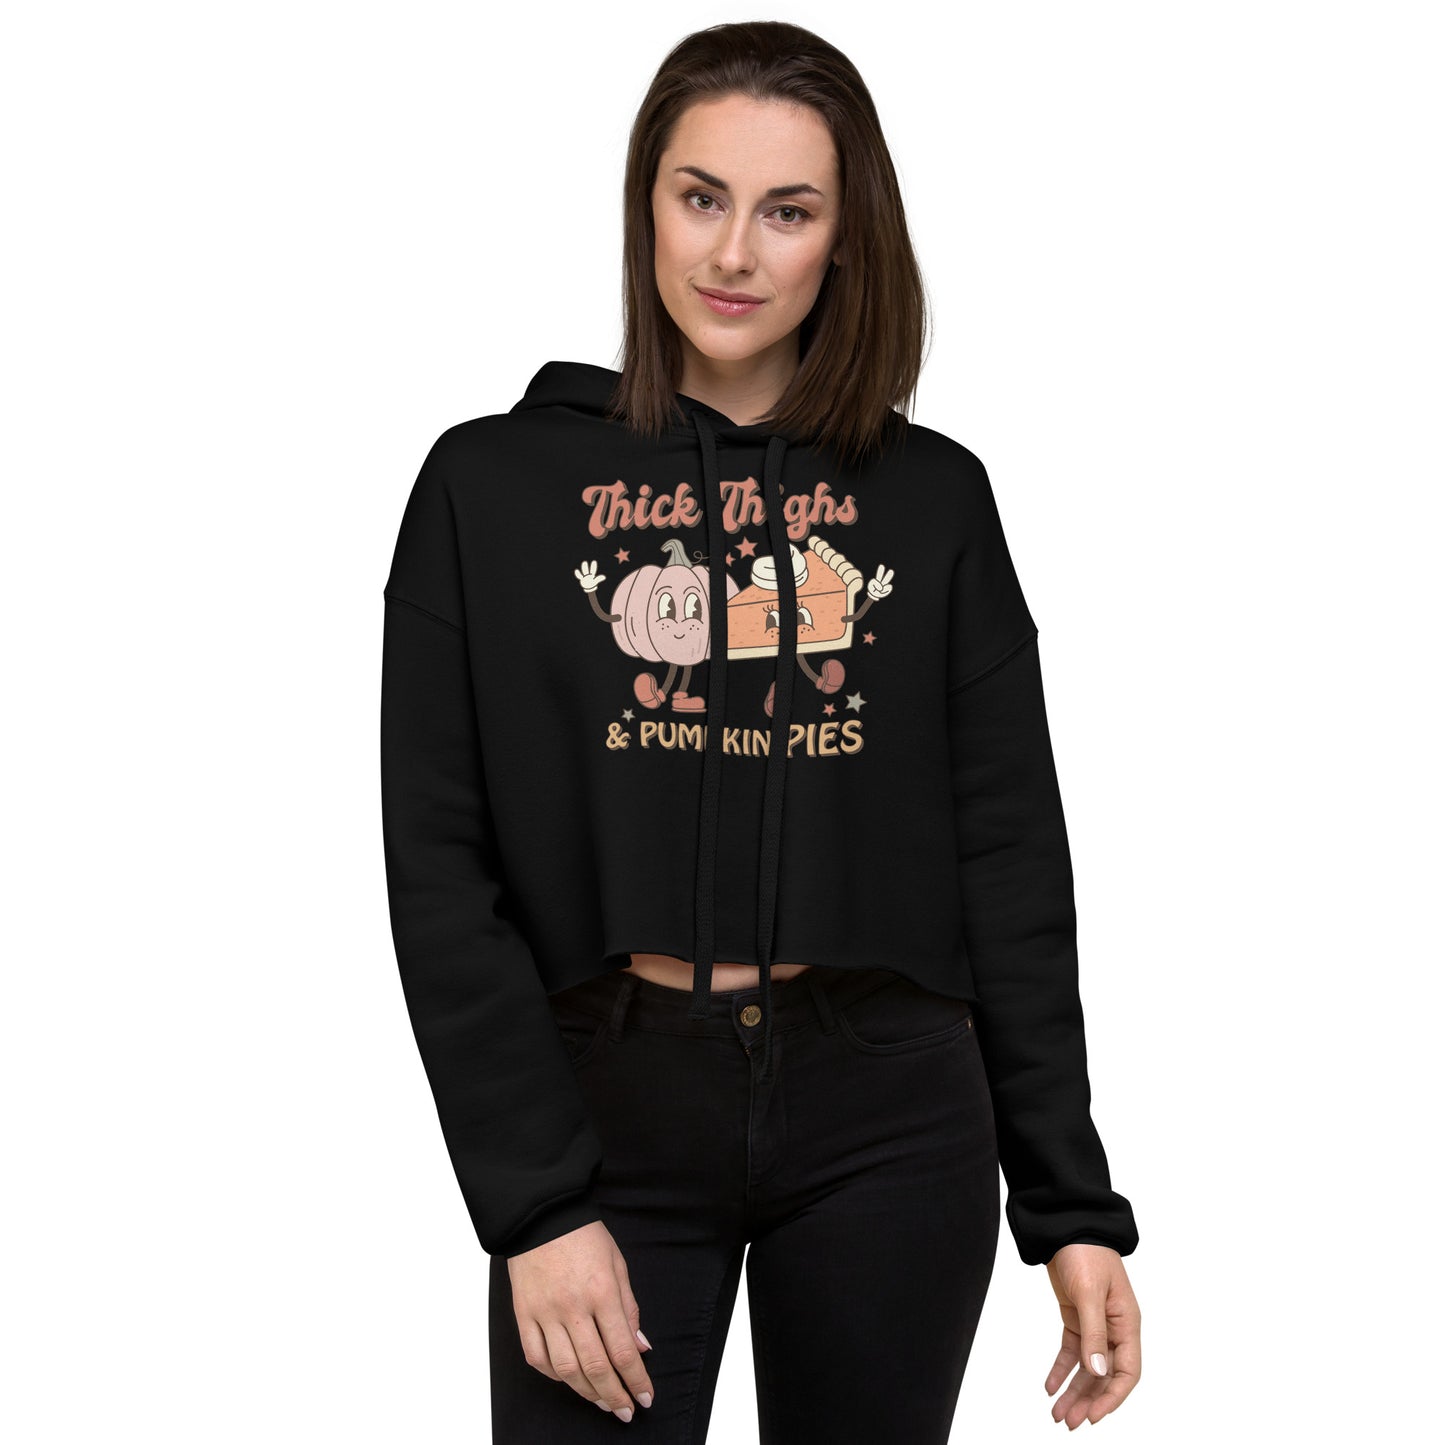 Thick Thighs and Pumpkin Pies Thanksgiving Season Cozy Crop Hoodie